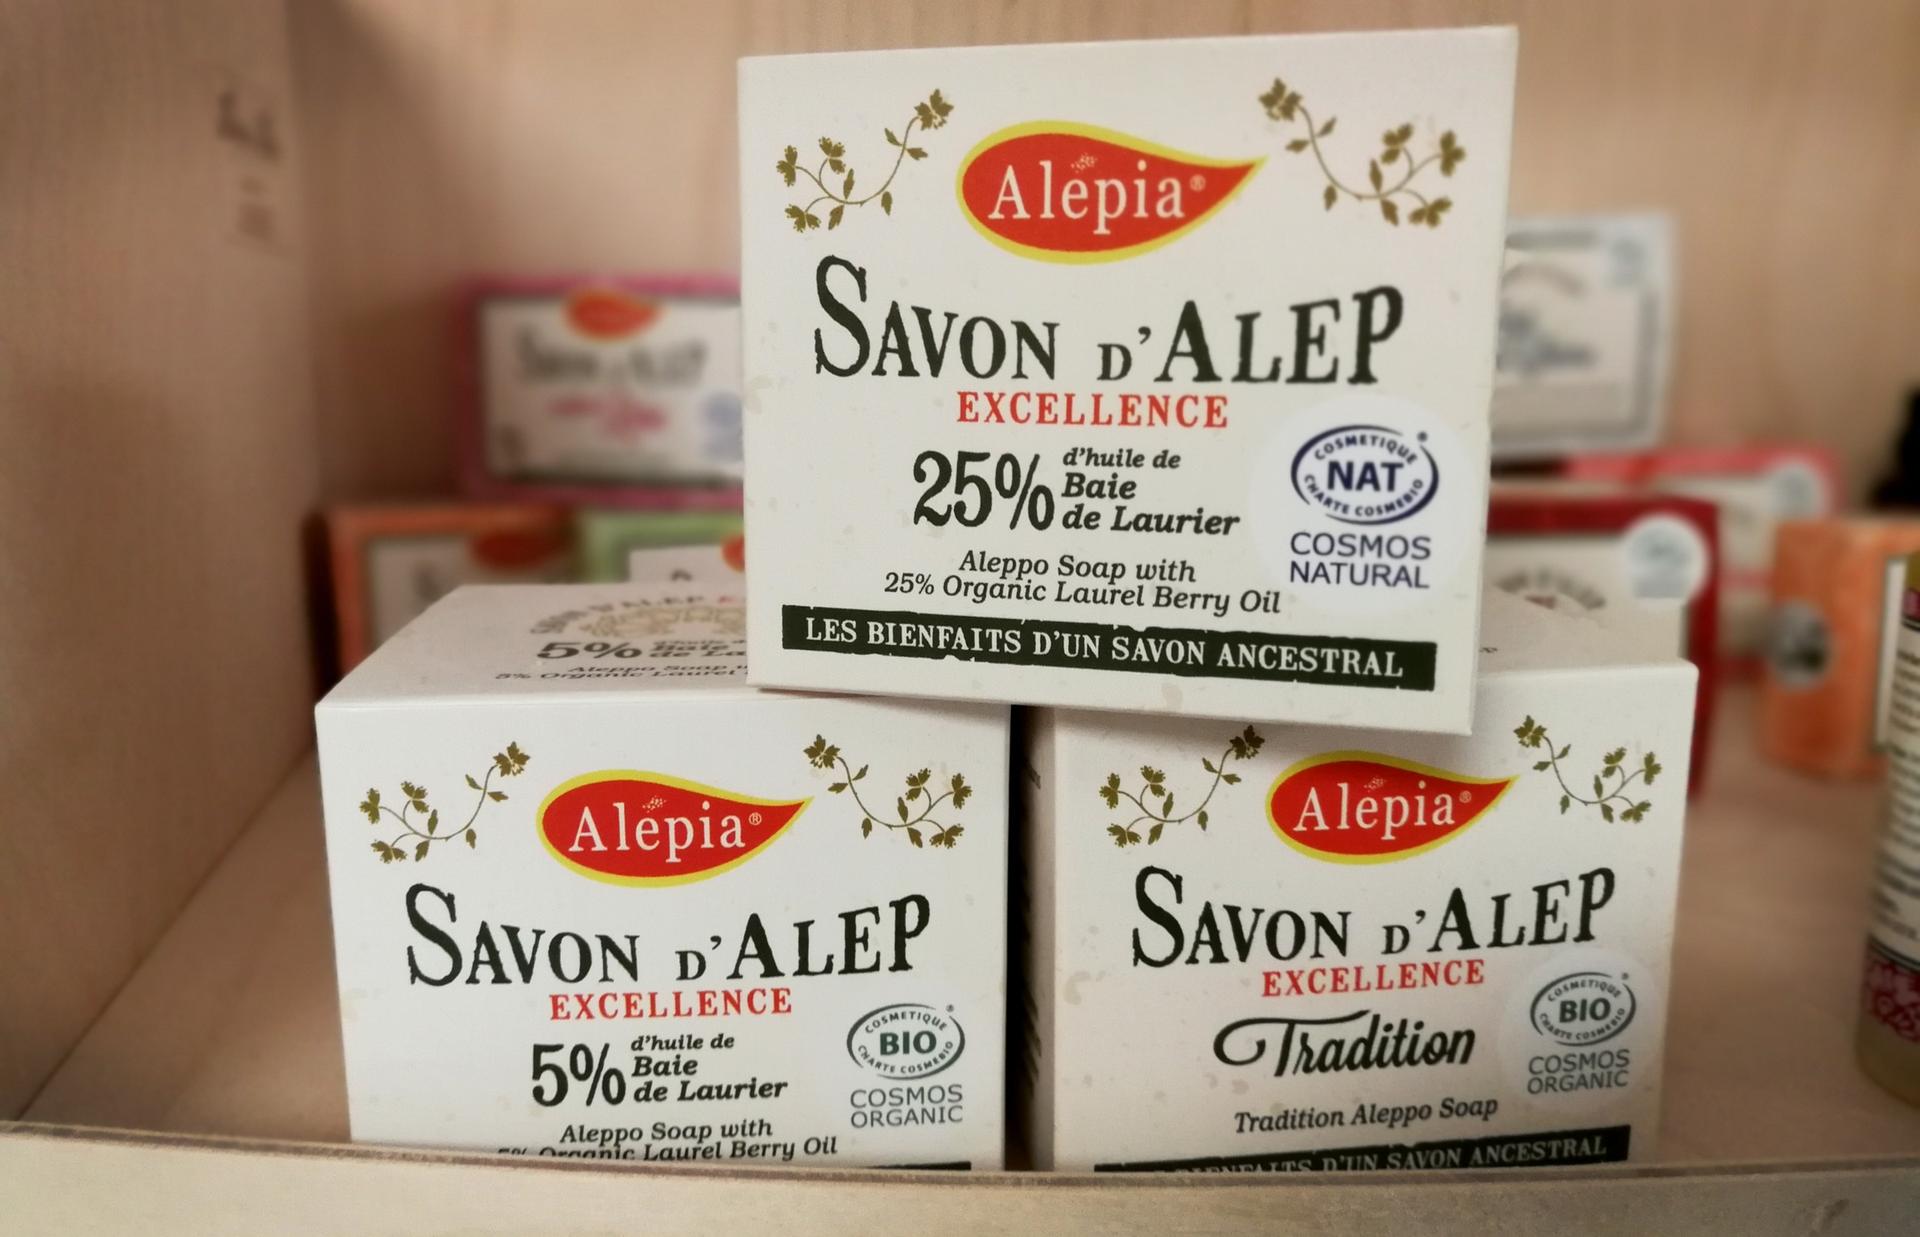 Packaged soap sits on a shelf. The packages are written in French with the name 